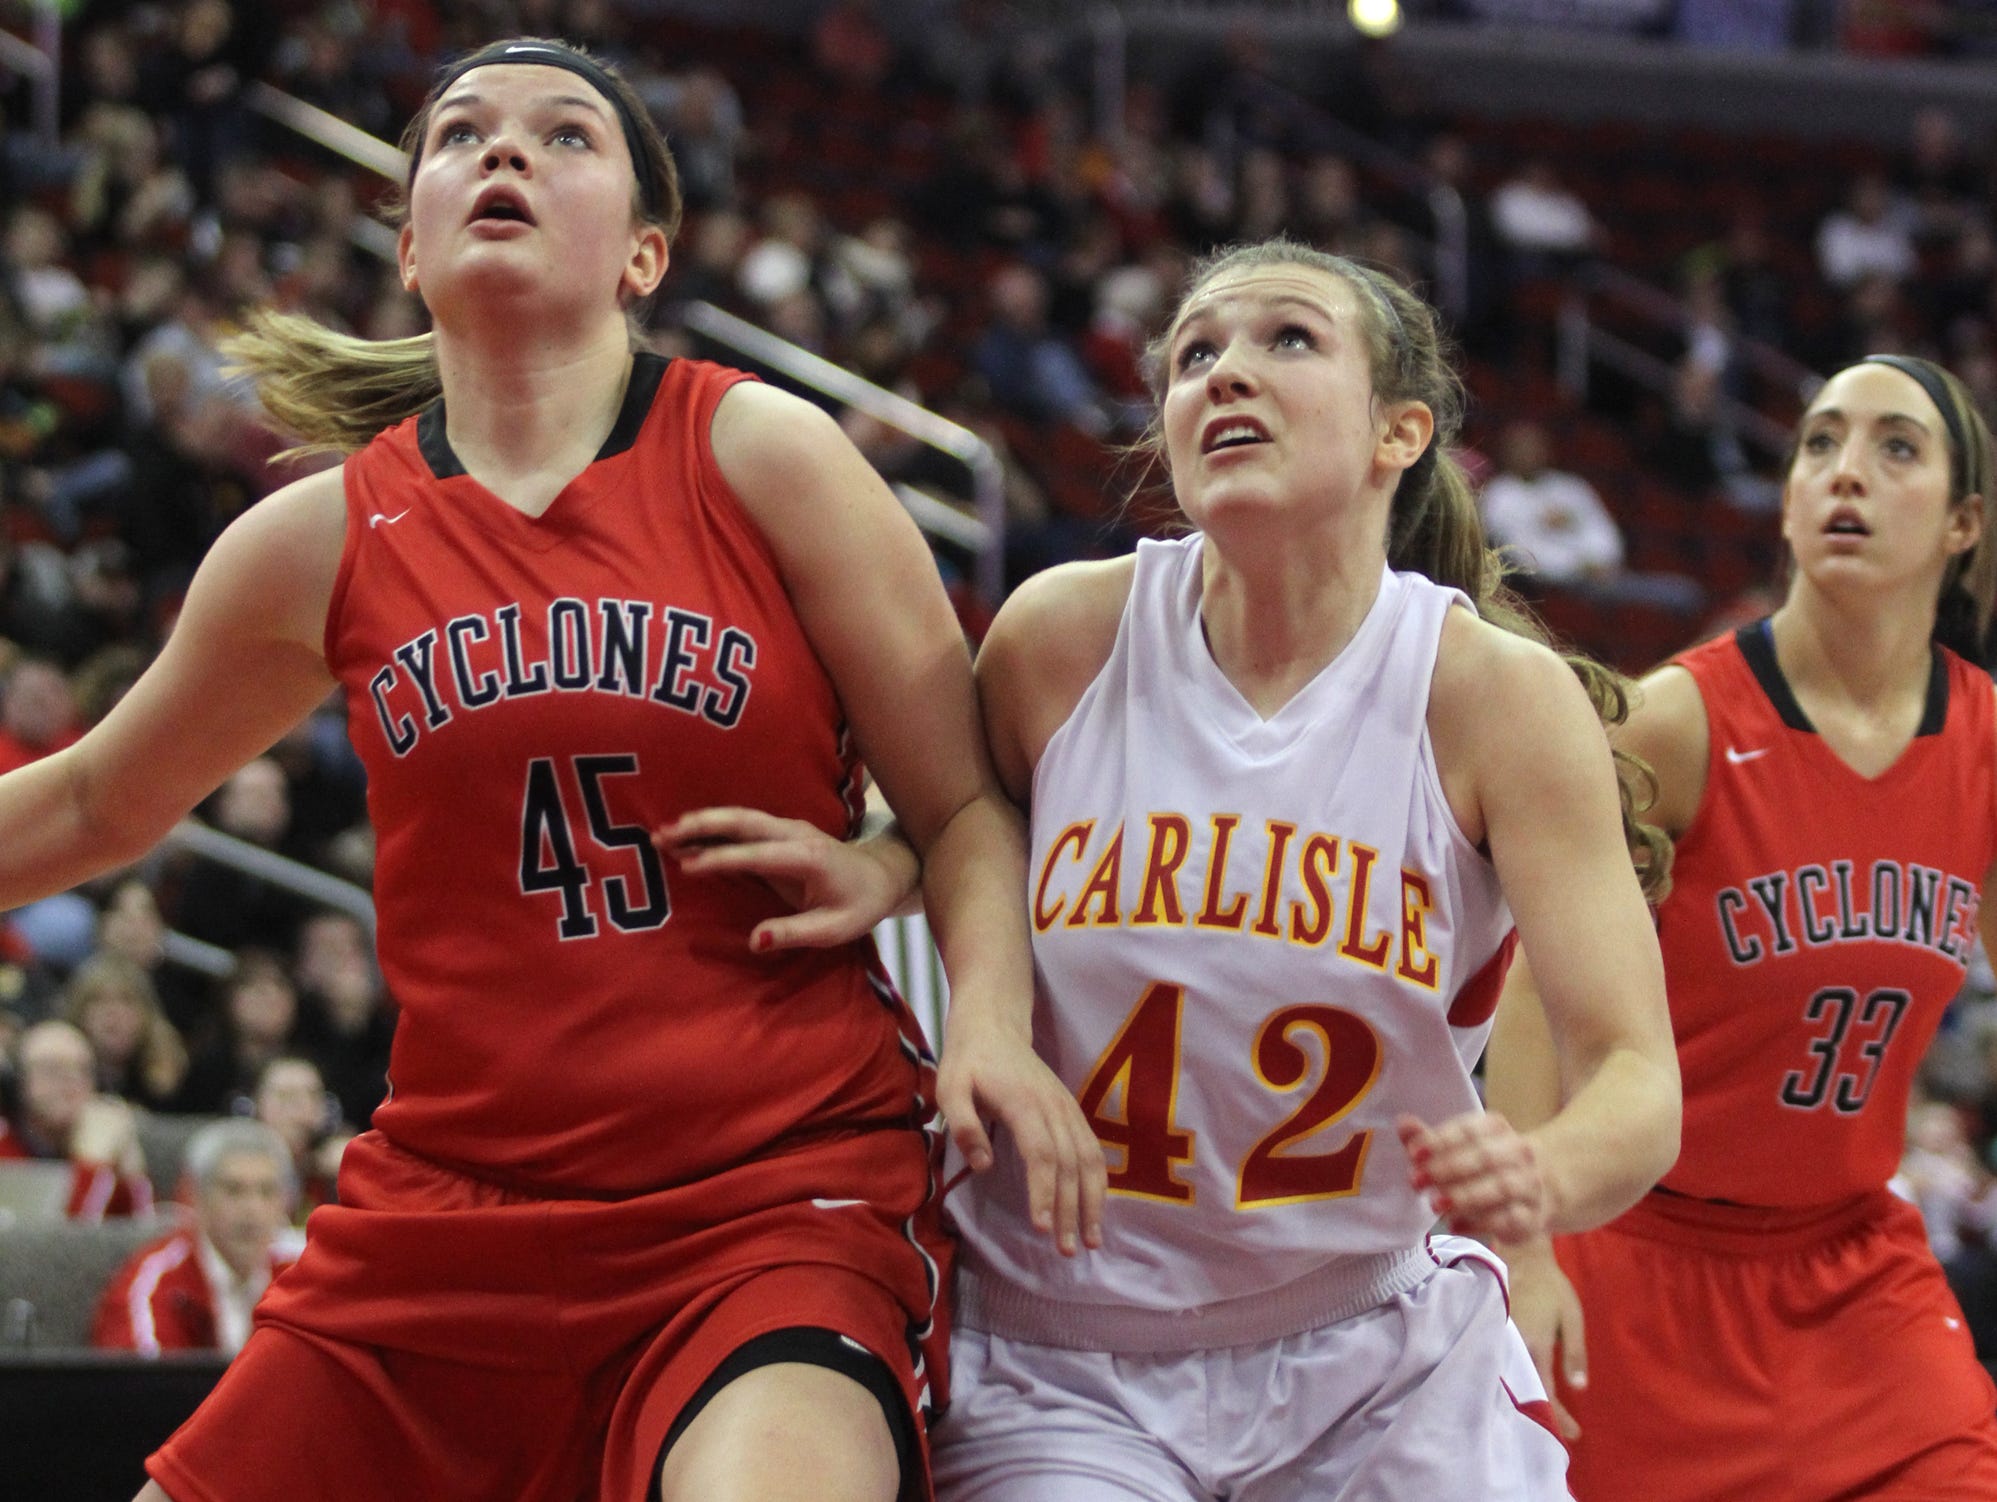 Harlan's Taylor Frederick and Carlisle's Agatha Beier fight for position on a rebound in a Class 4-A semifinal at Wells Fargo Arena in Des Moines last season. Carlisle lost to top-ranked Harlan 69-43.